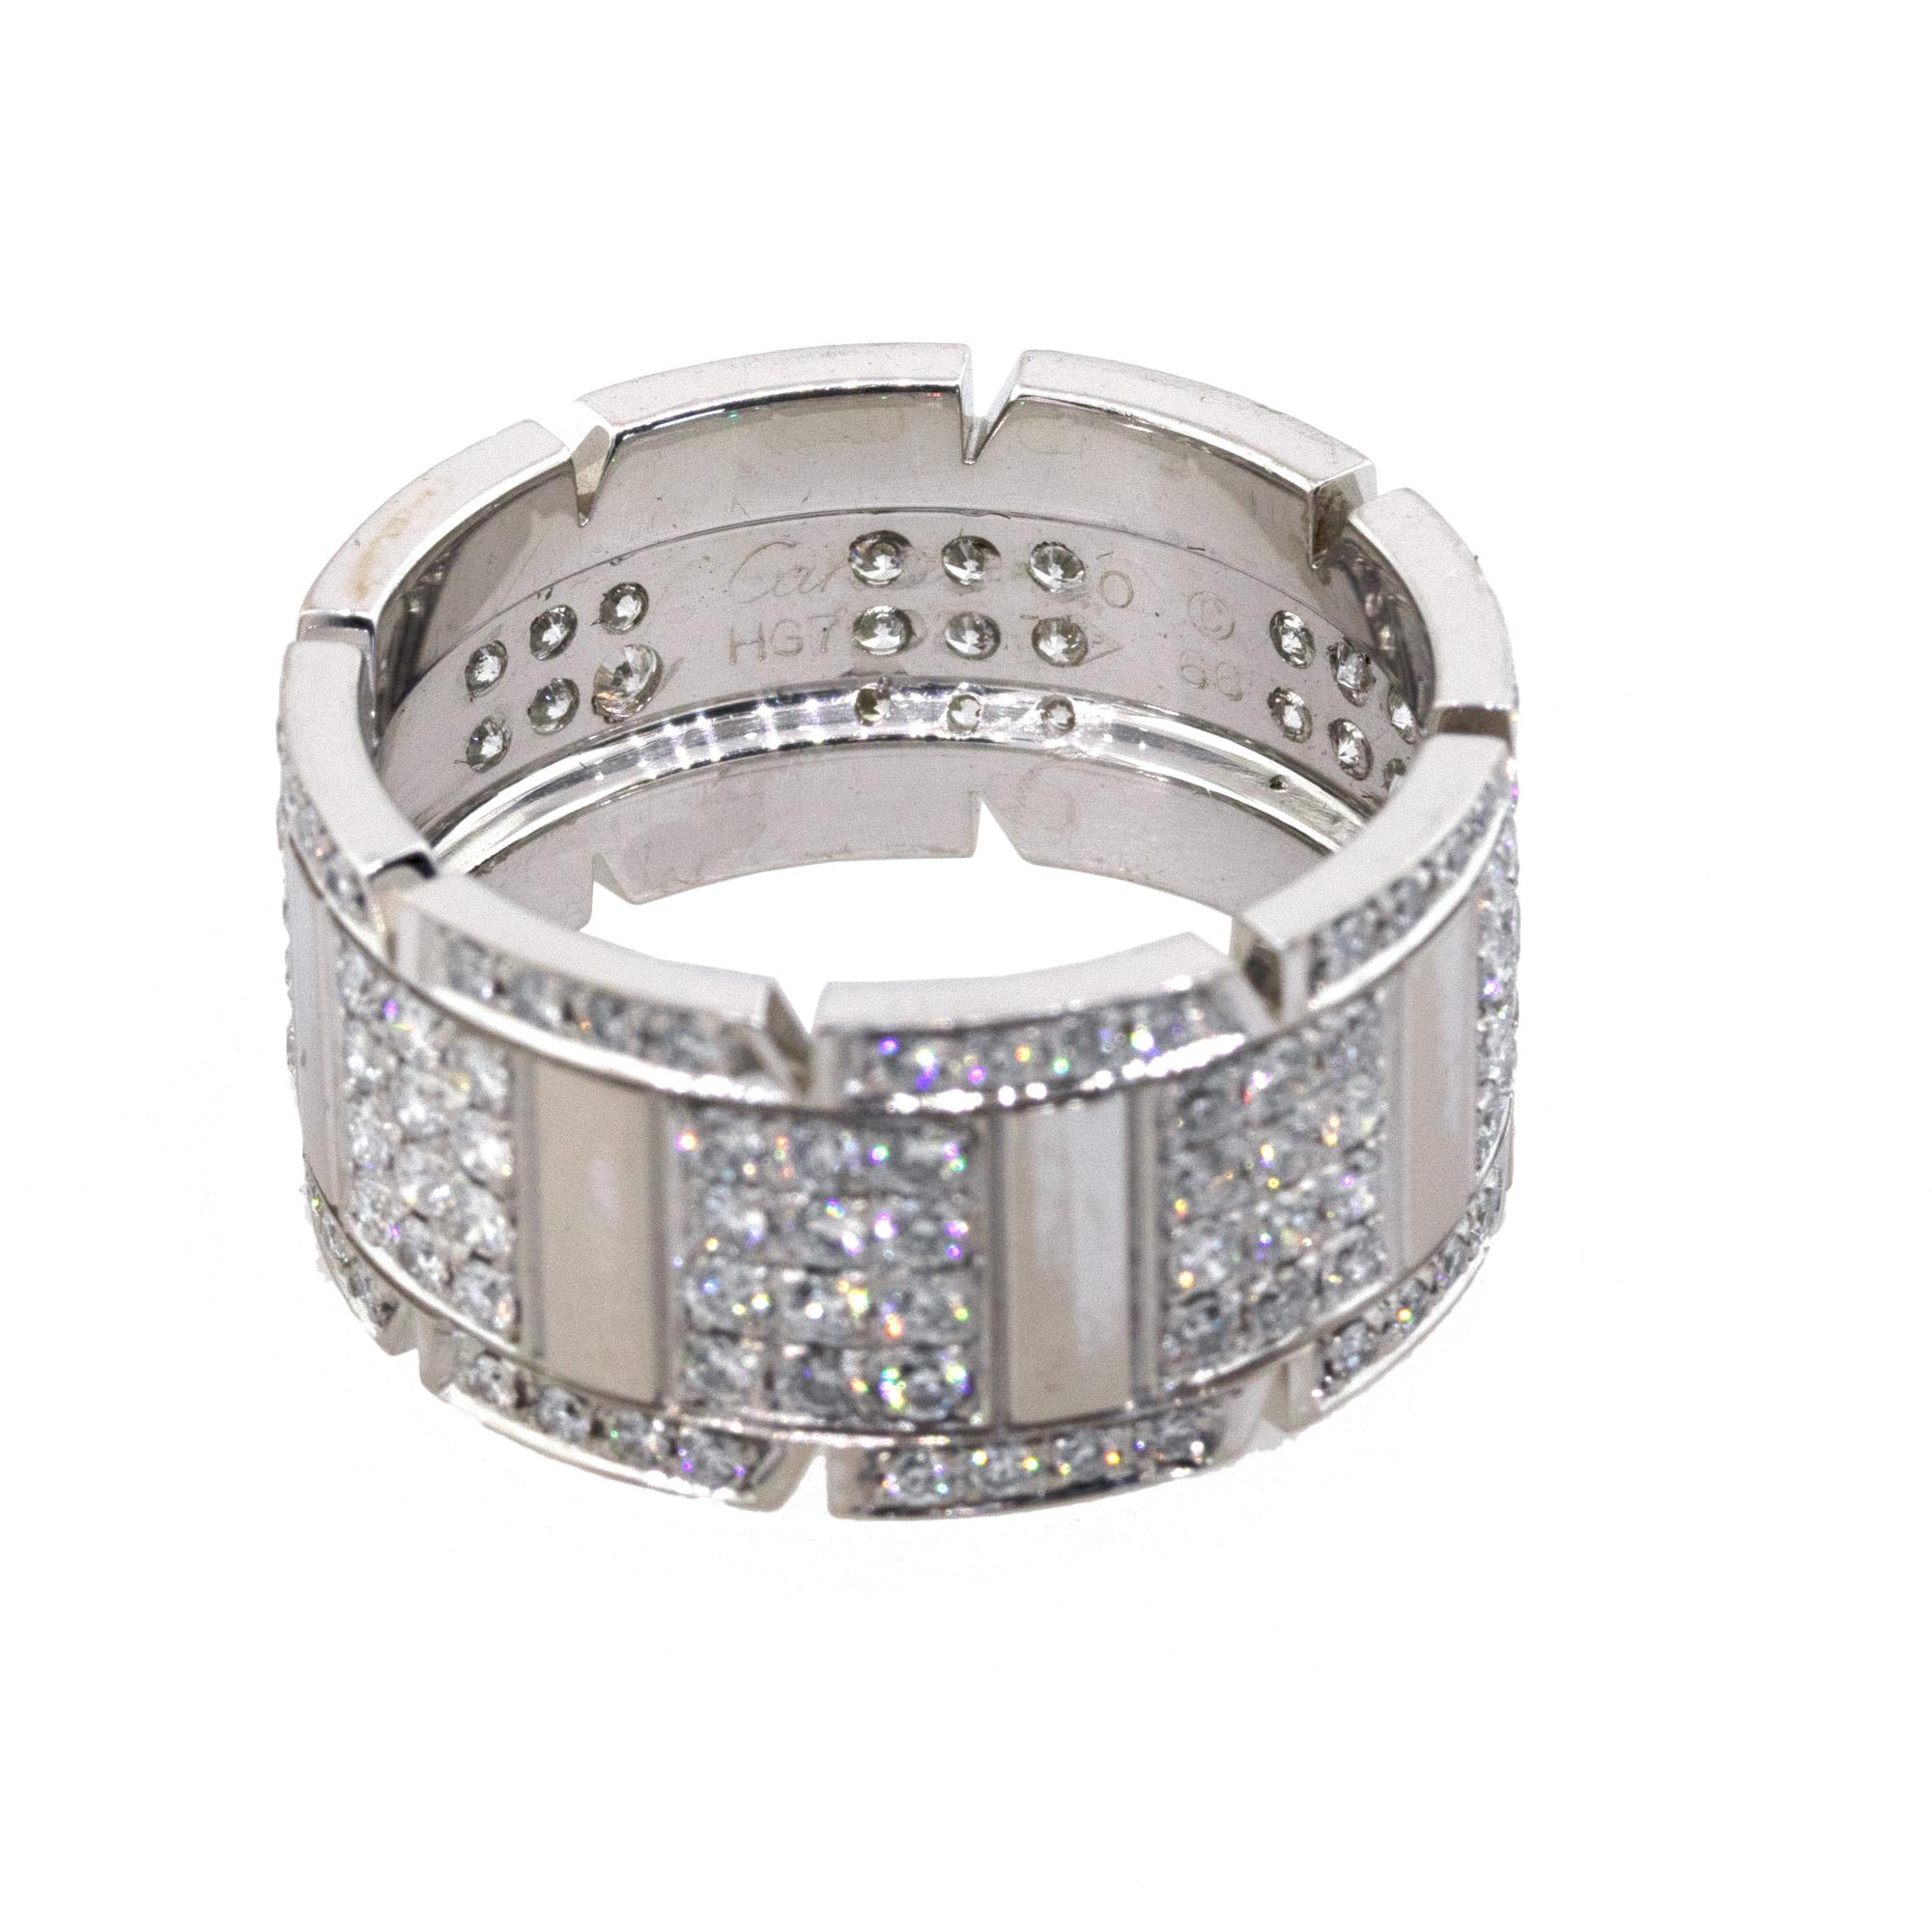 Designer: Cartier
Material: 18k white gold and aftermarket Diamonds
Diamond Details: Approximately 4.5ctw of round brilliant diamonds, Diamonds are G/H in color and SI in clarity
Ring Size: Size 12
Ring Measurements: 0.98